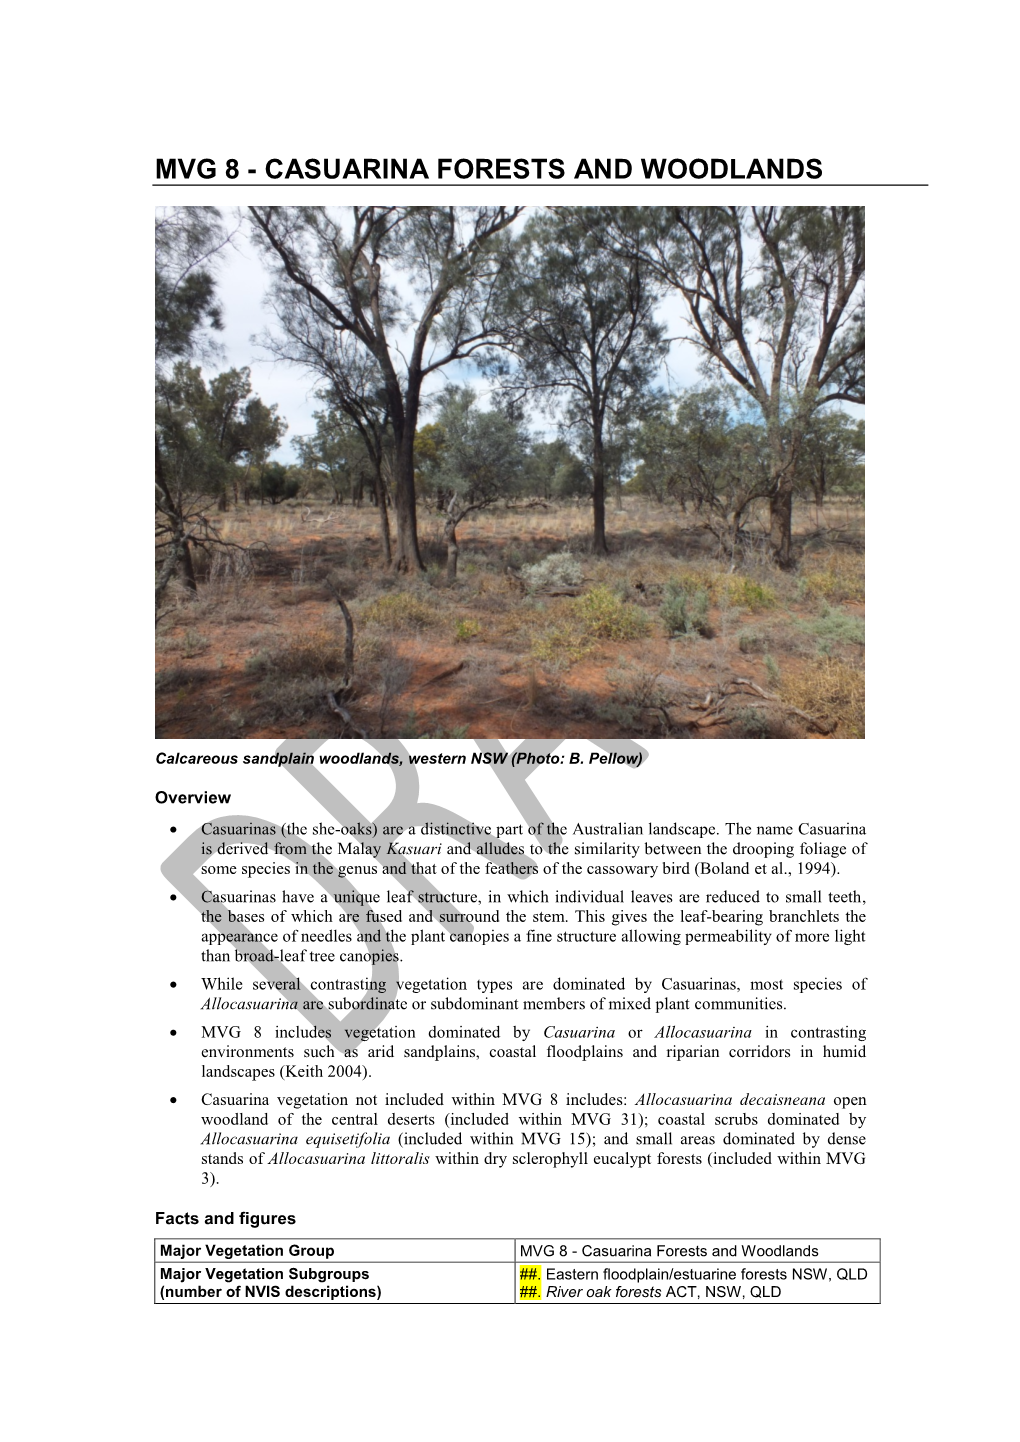 MVG 8 Casuarina Forests and Woodlands DRAFT